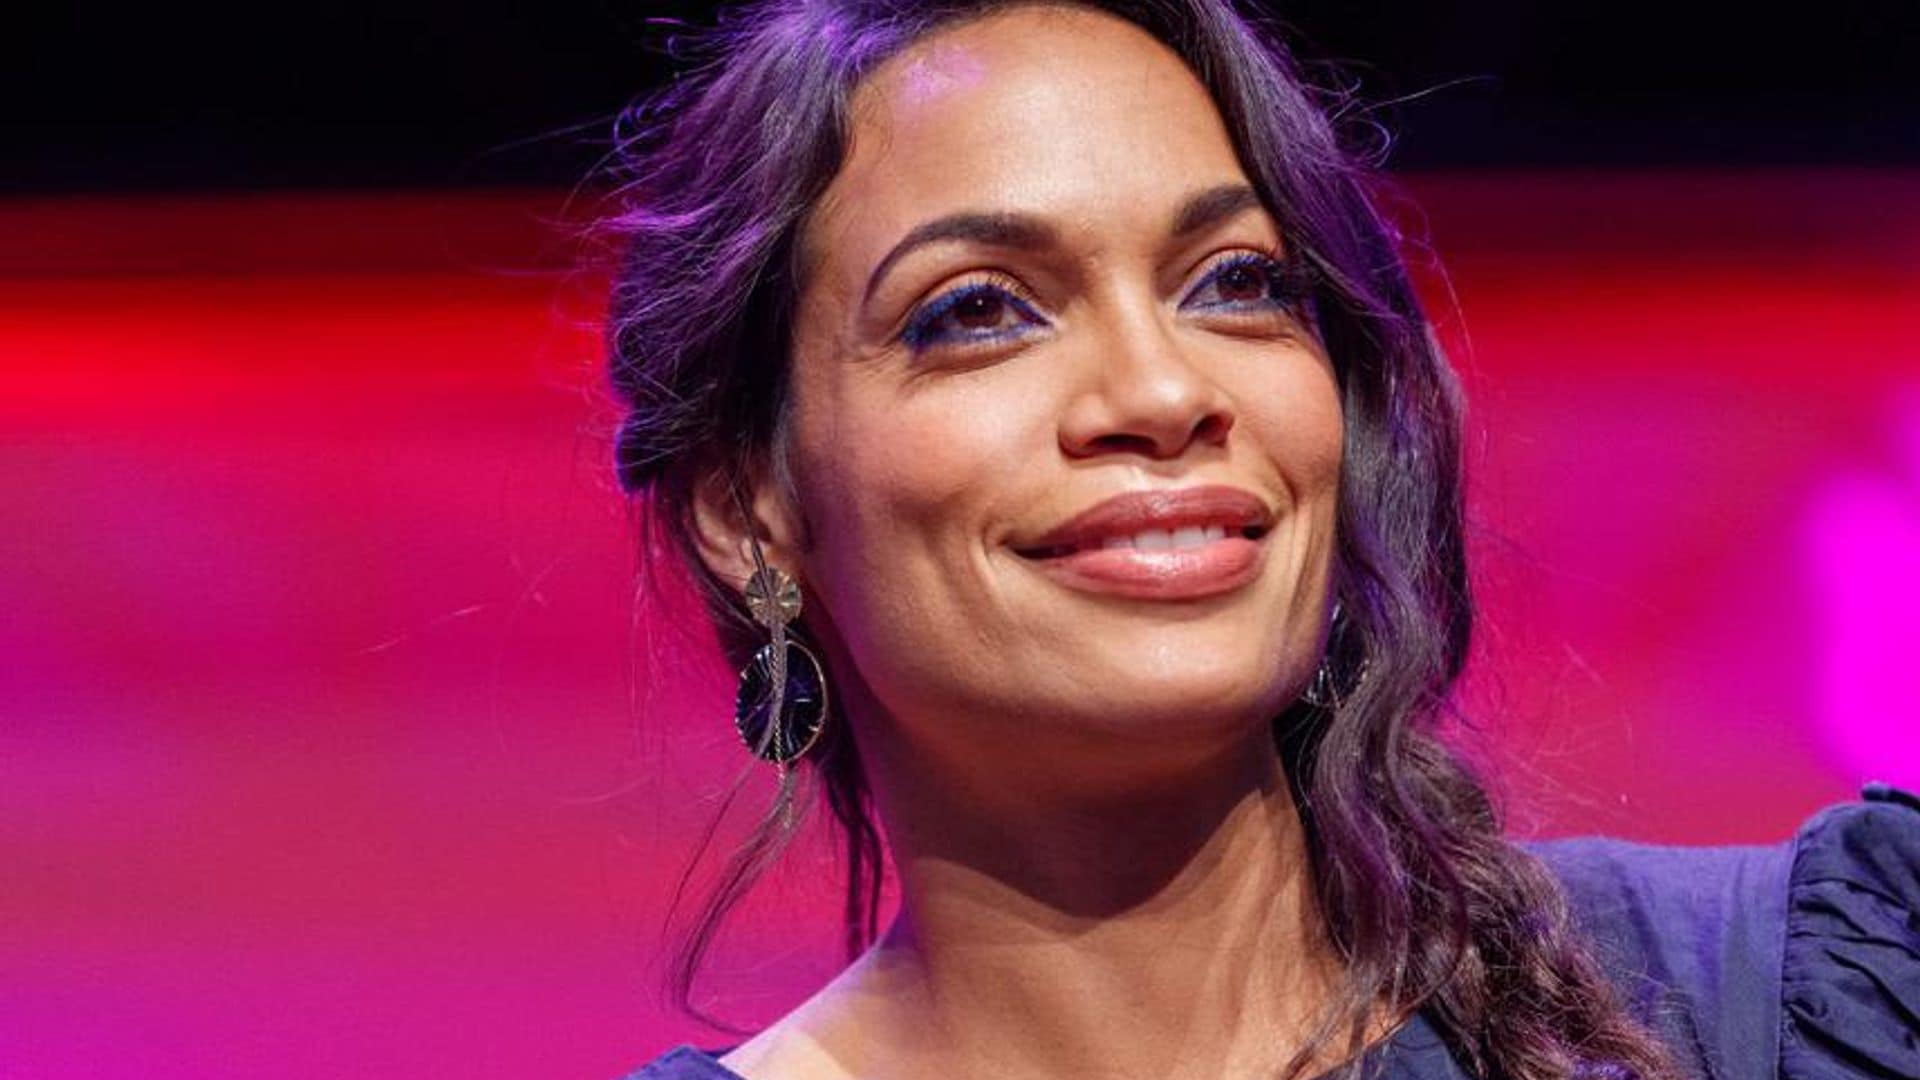 Rosario Dawson on what she would support if she were to become First Lady